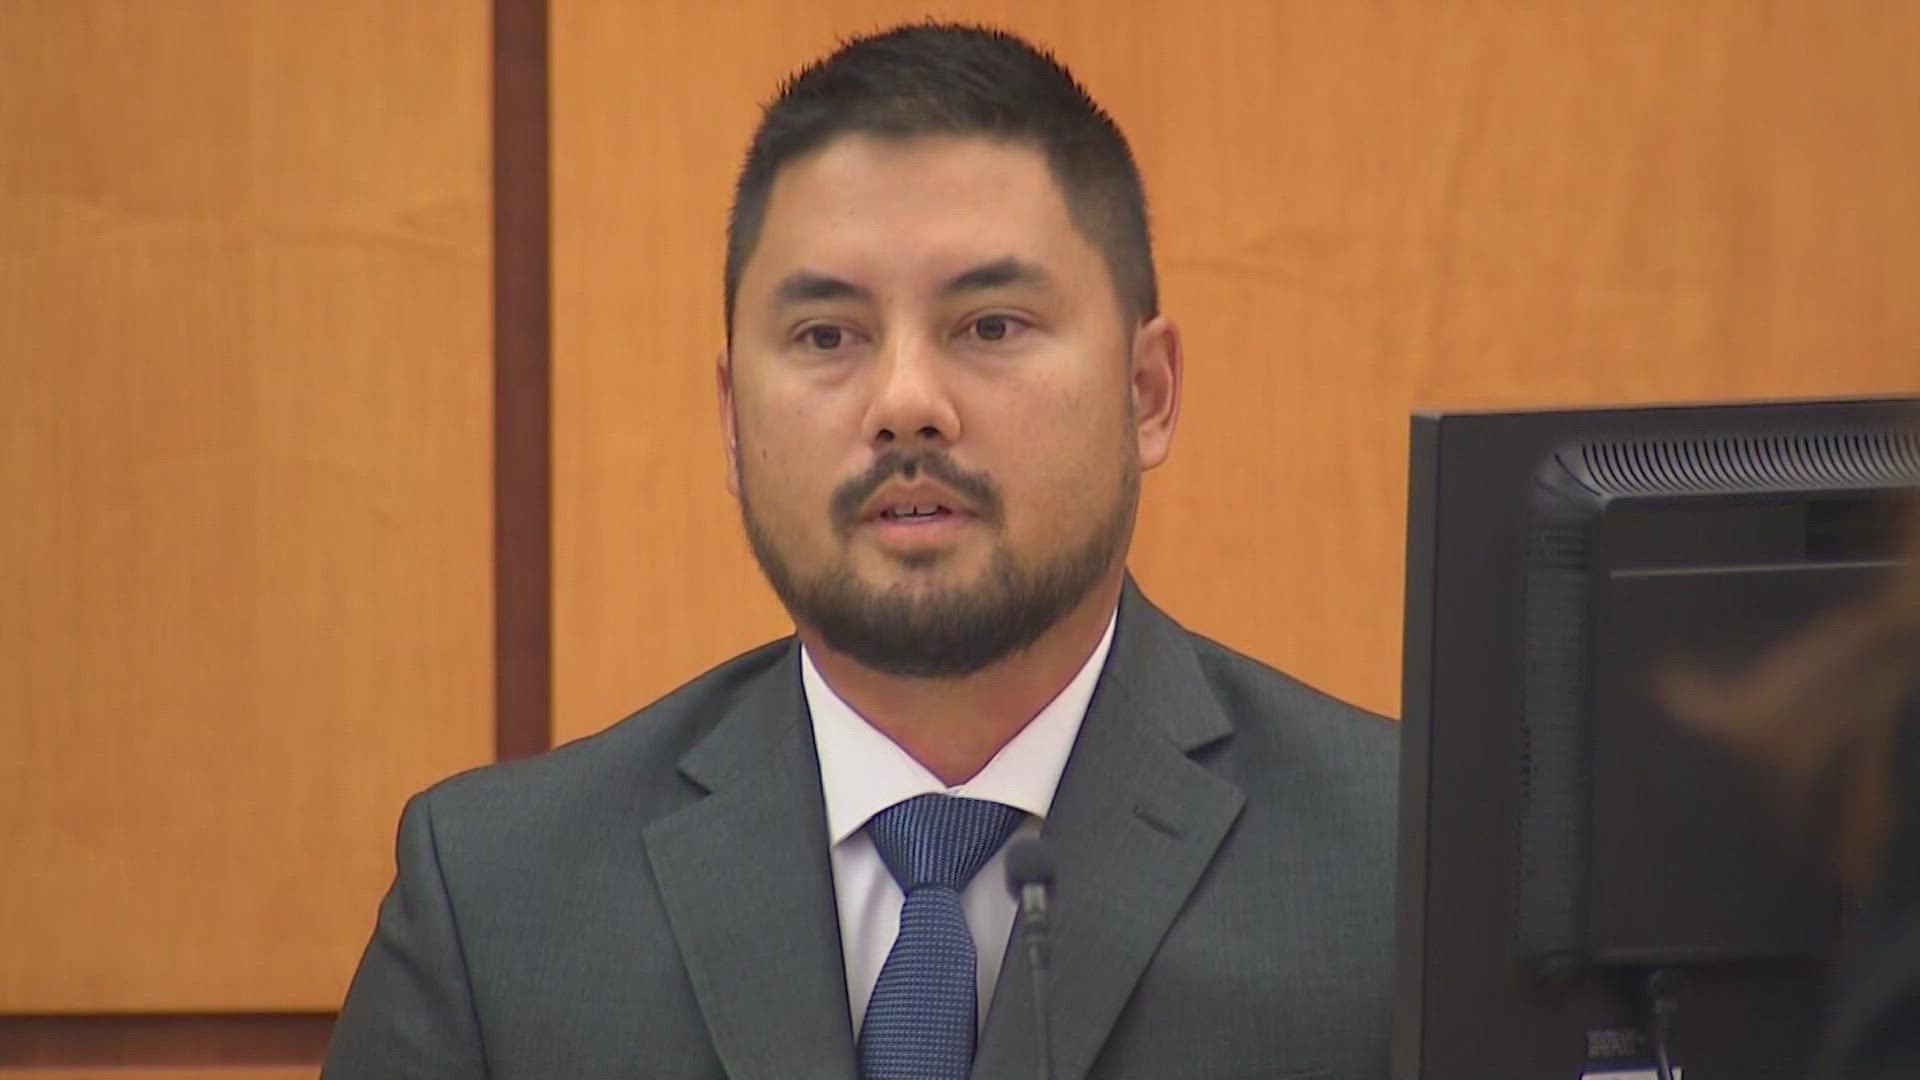 The first witness to testify for the state was former Tacoma officer Corey Ventura, who responded to the incident involving the sheriff and a newspaper carrier.